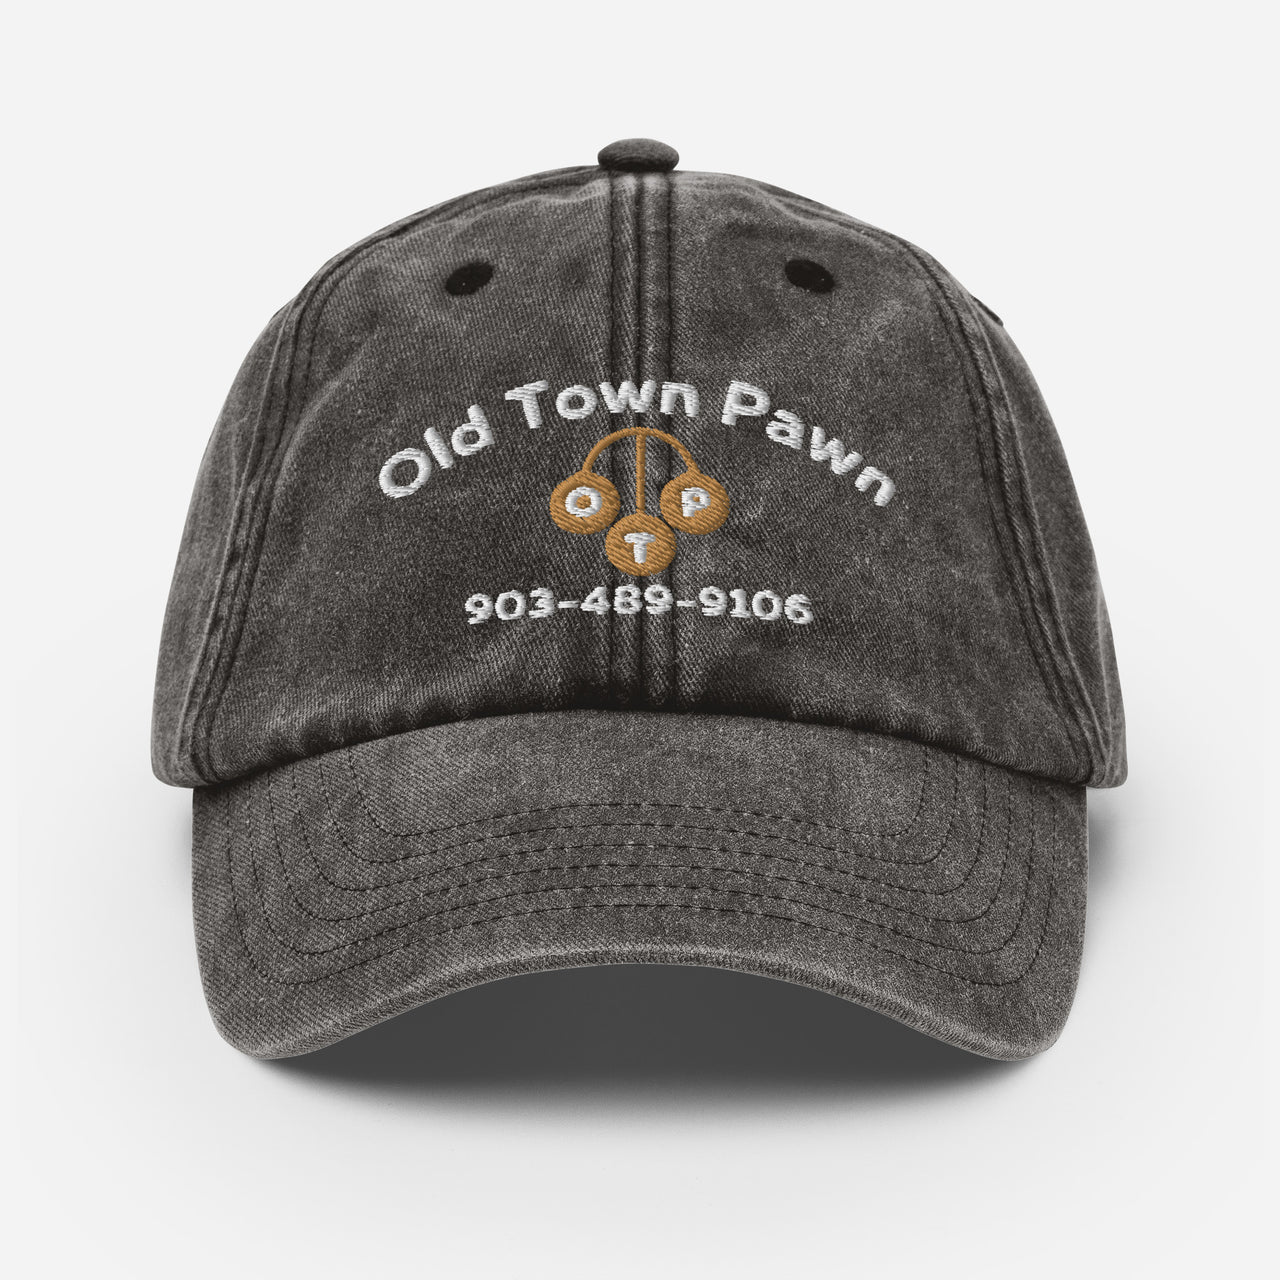 Old Town Pawn Vintage Hat